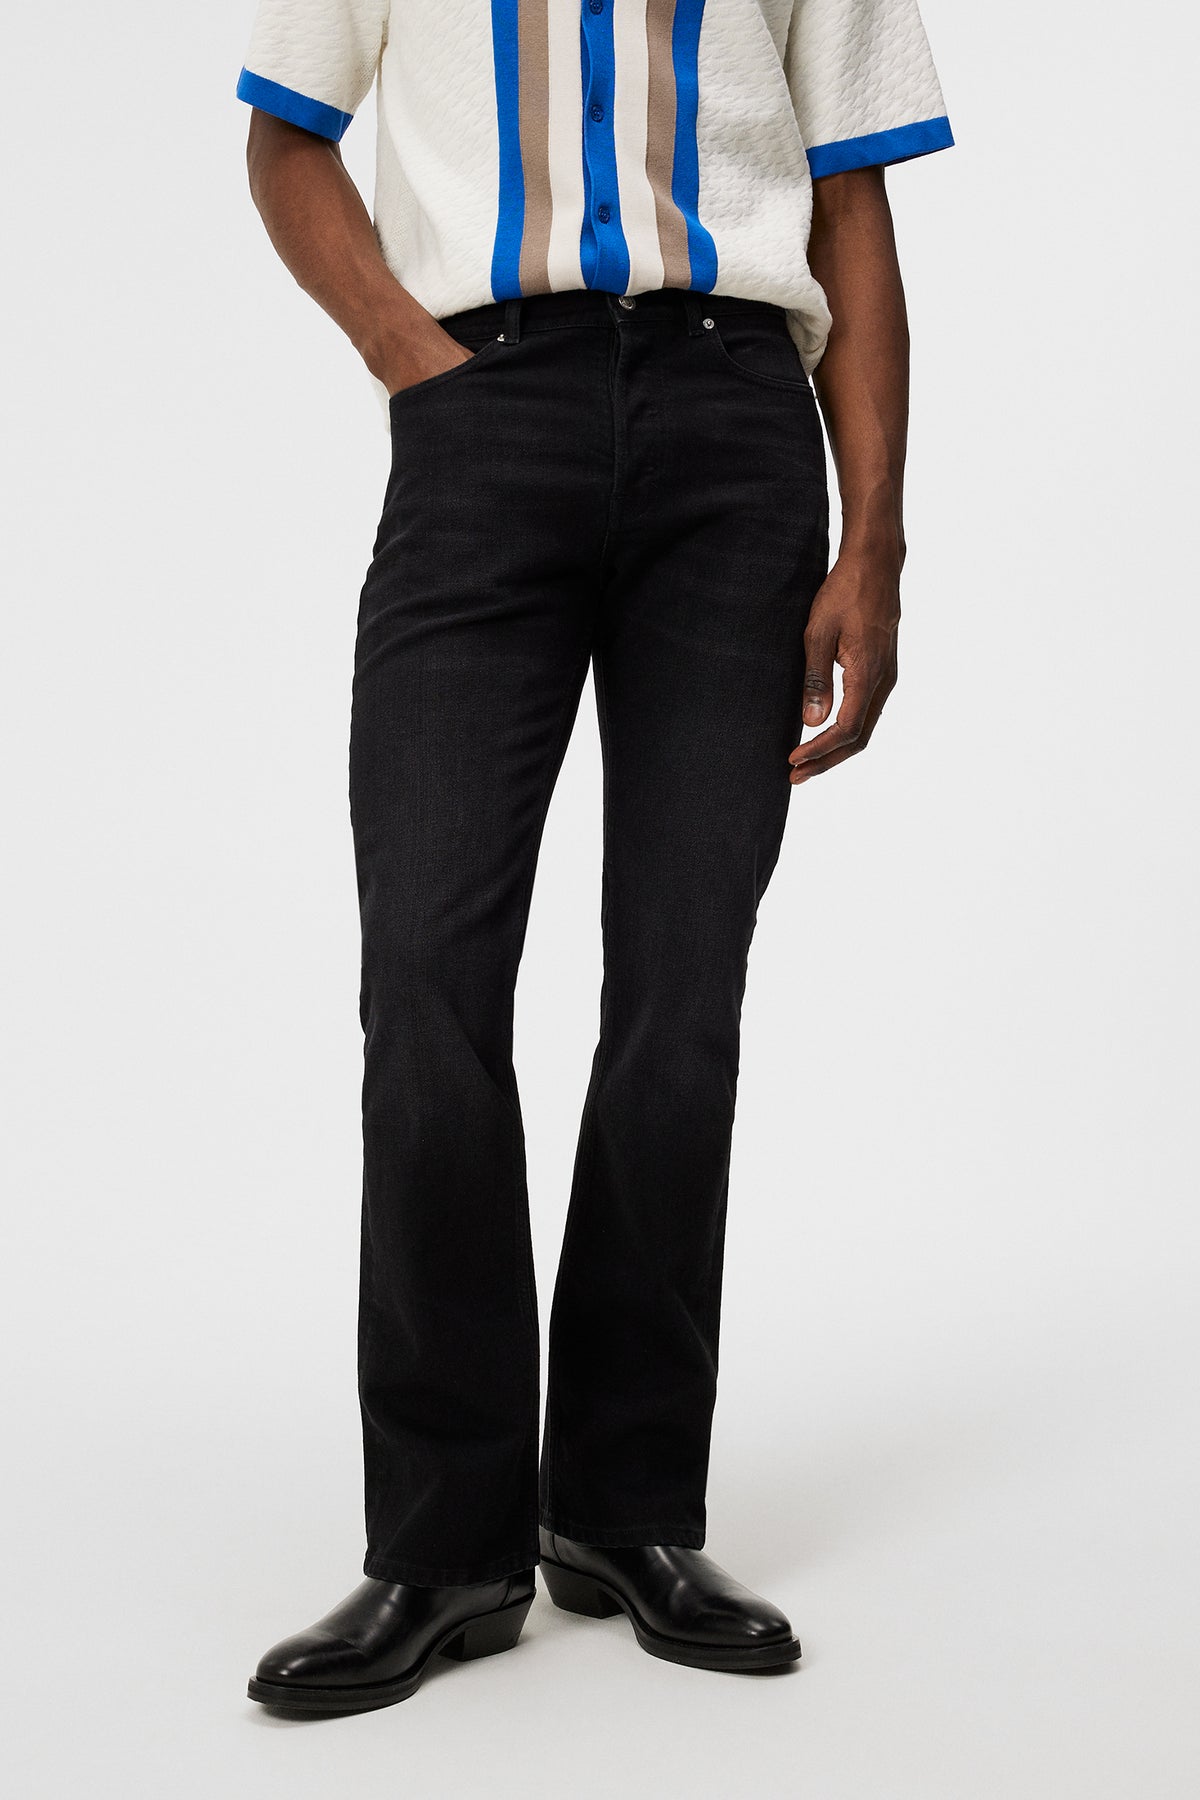 Ray Flared Jeans / Black